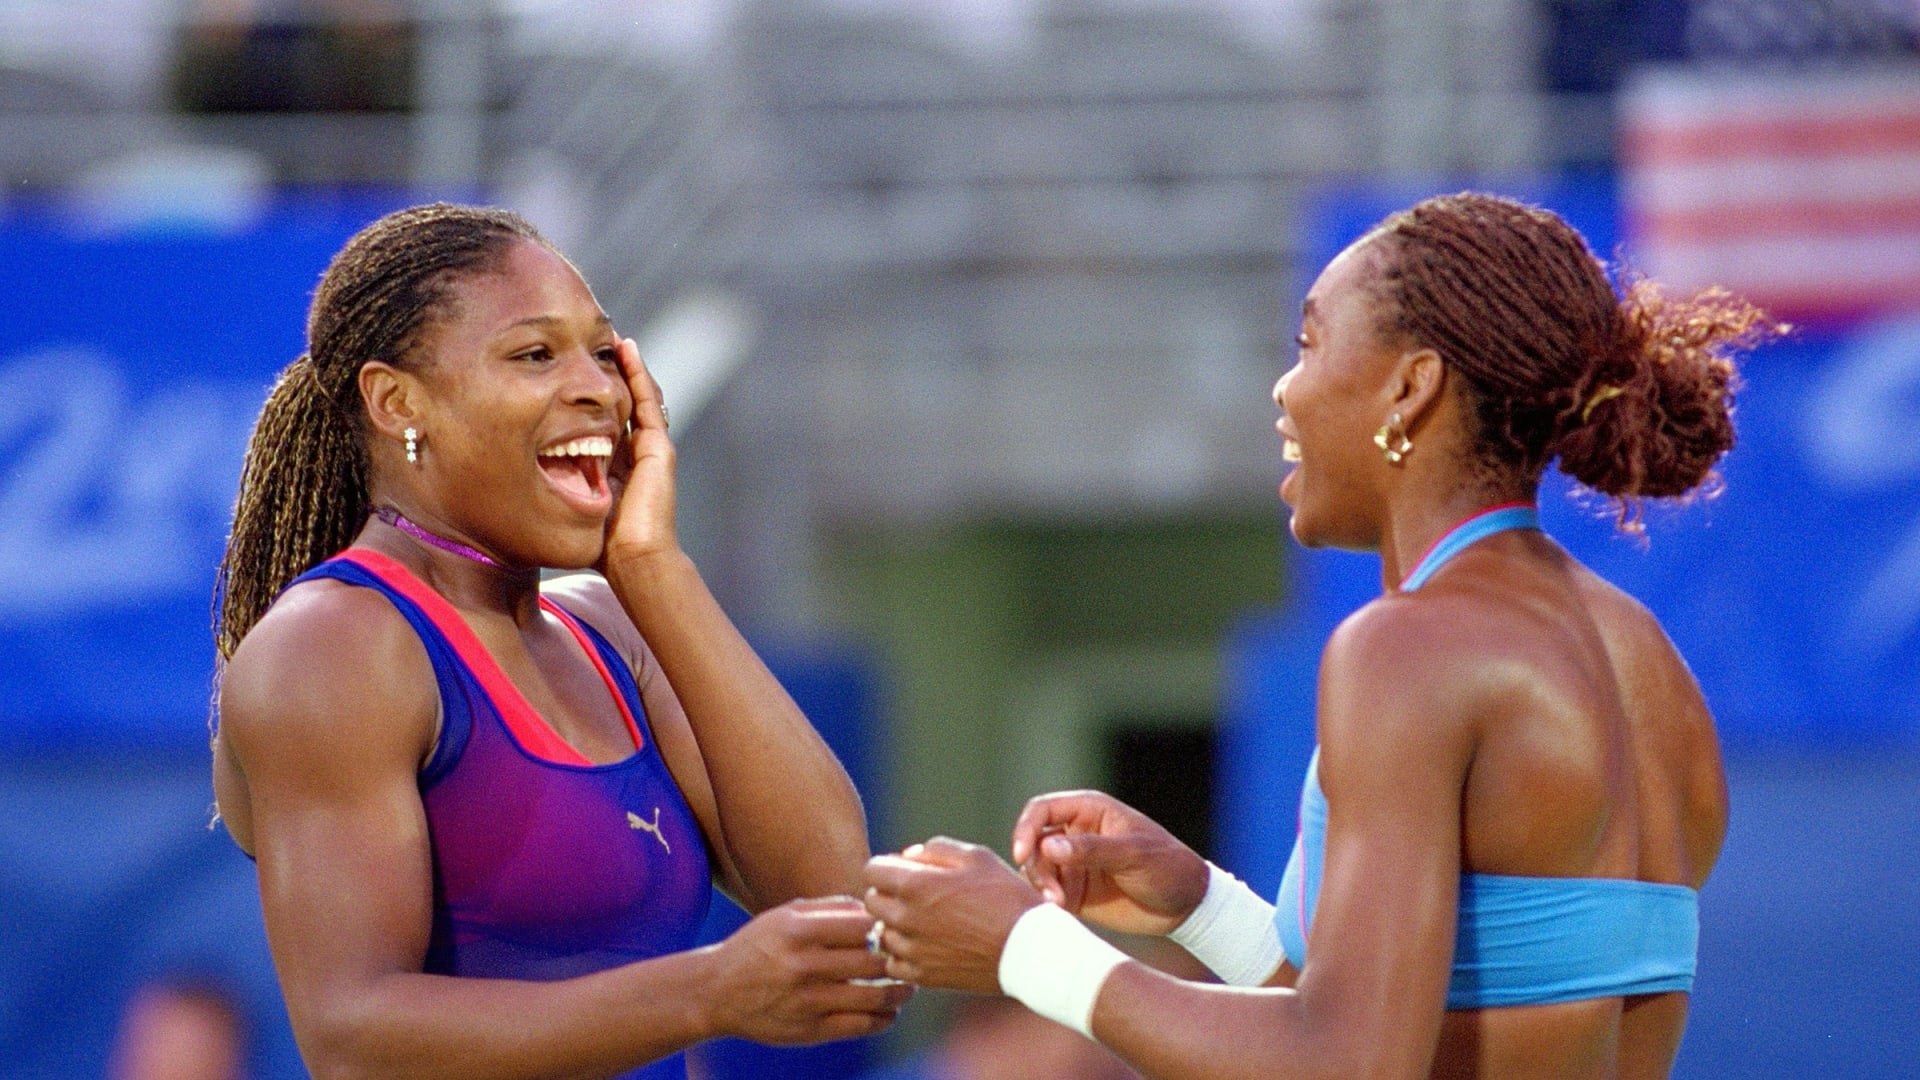 When Serena and Venus were part of the 1998 NBA All-Star Weekend celebrity  competition 🏀